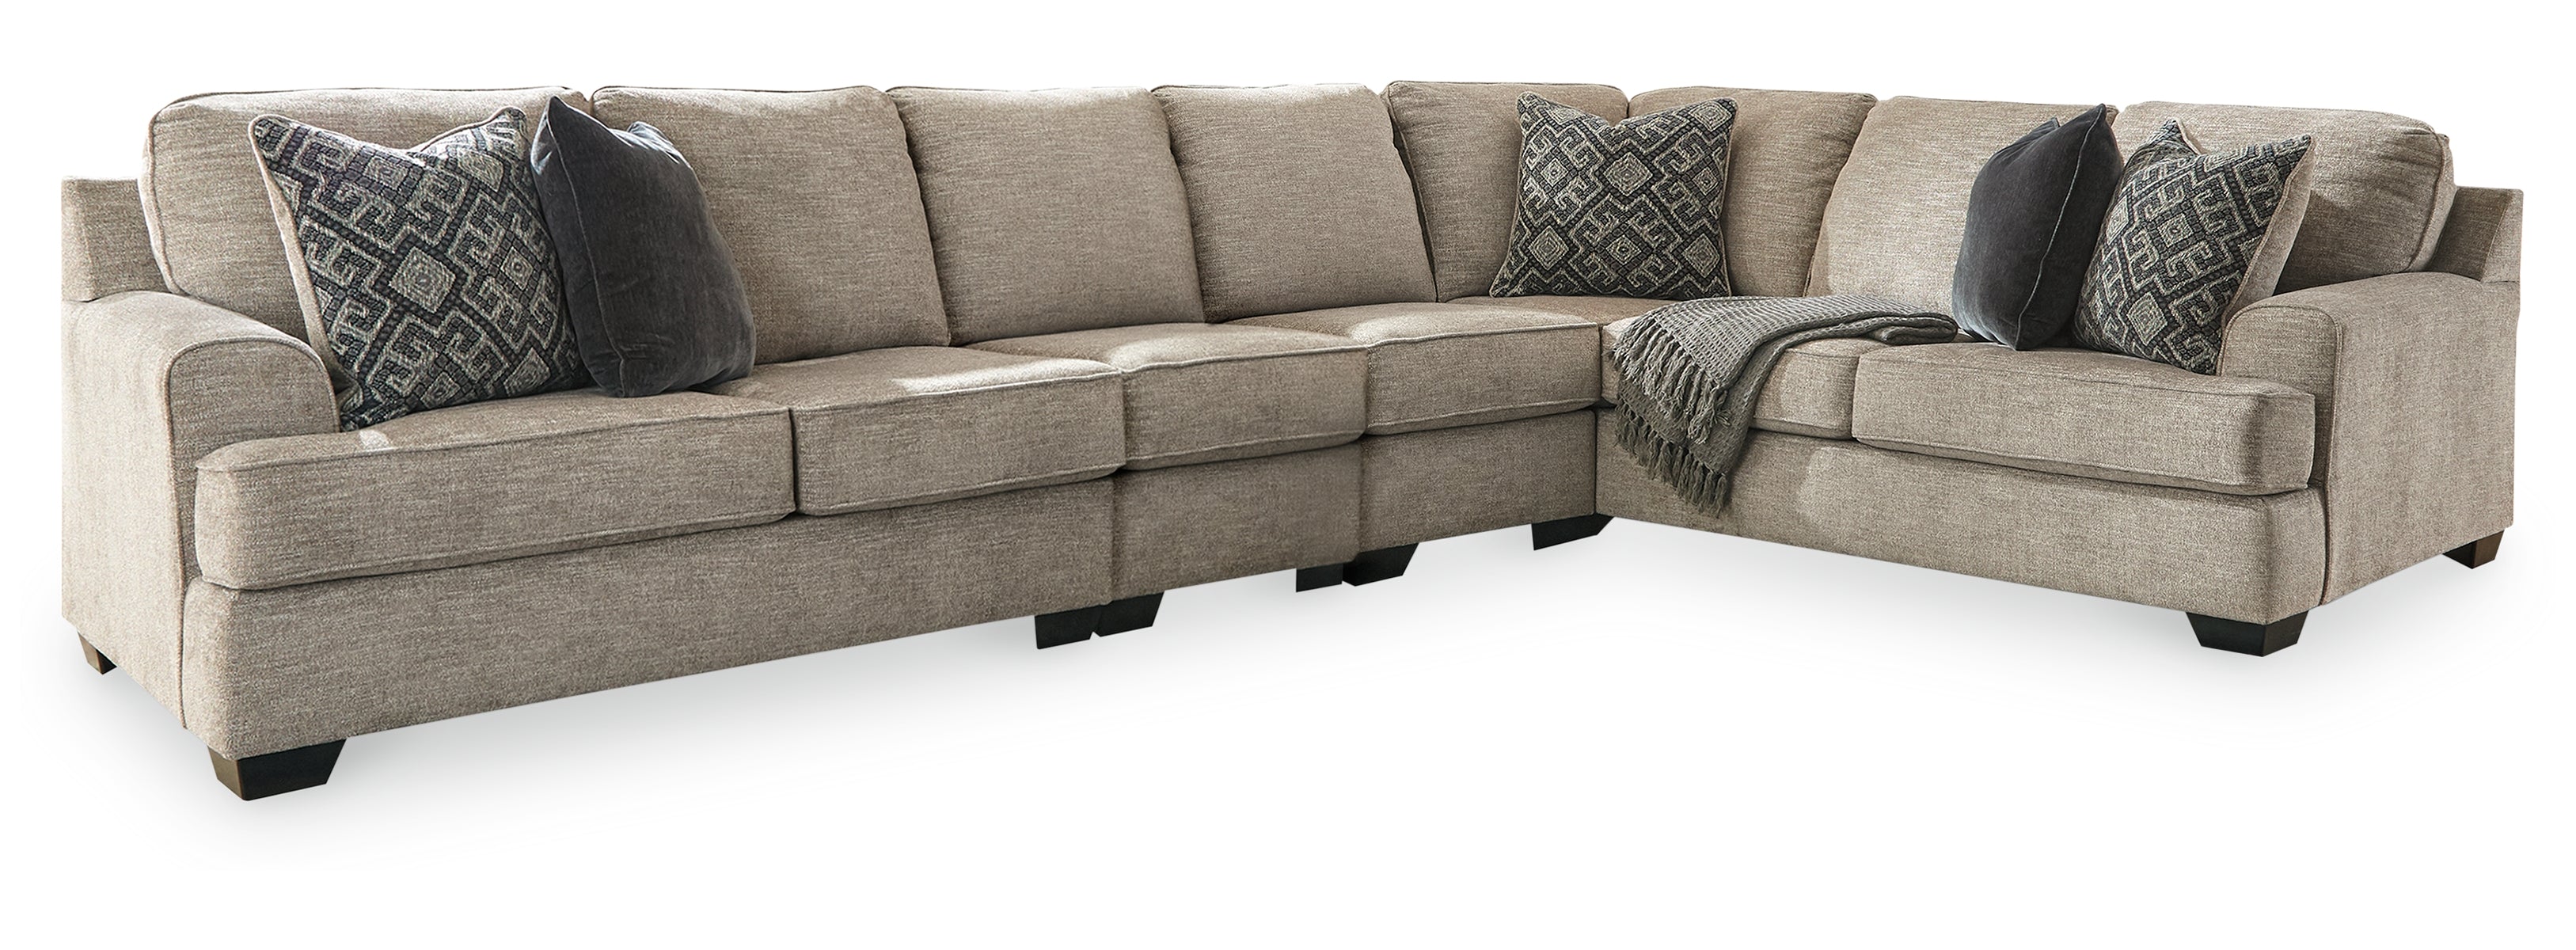 Bovarian 4-Piece Sectional with Ottoman